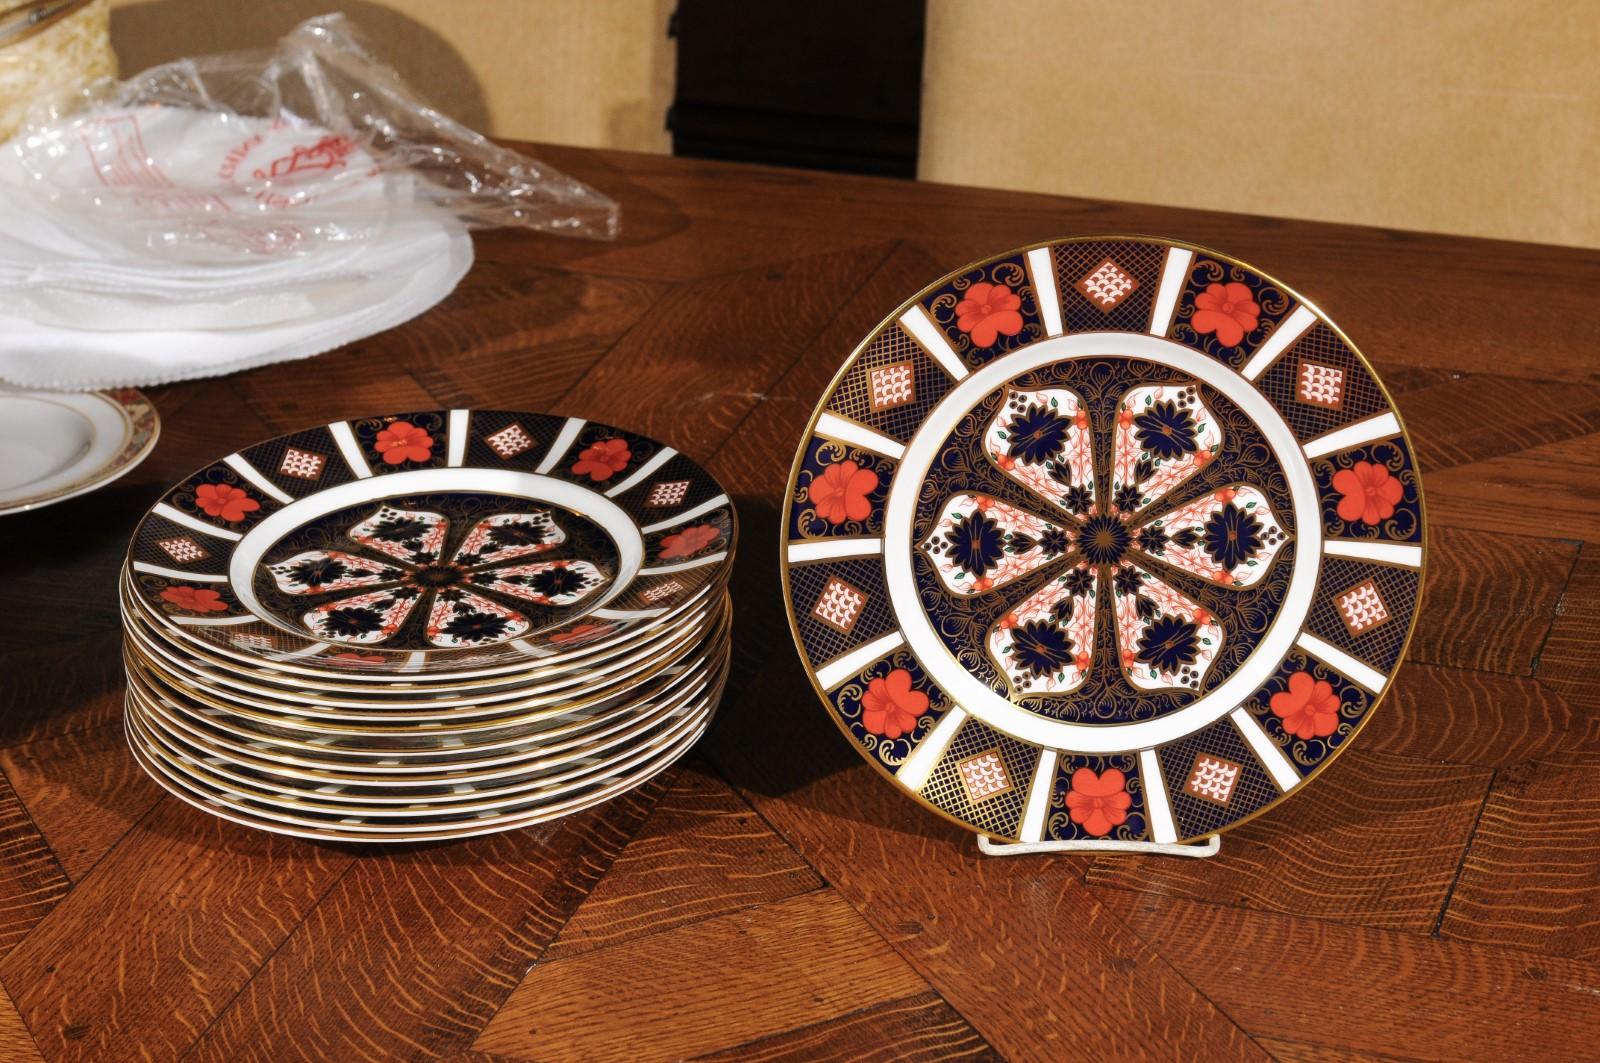 A set of 24 English Royal Crown Derby Porcelain plates with Old Imari 1128 patterns. Born in England in 1995, this set of 24 plates was produced by the Royal Crown Derby Porcelain company, famous for its high quality bone china. Adorned with the